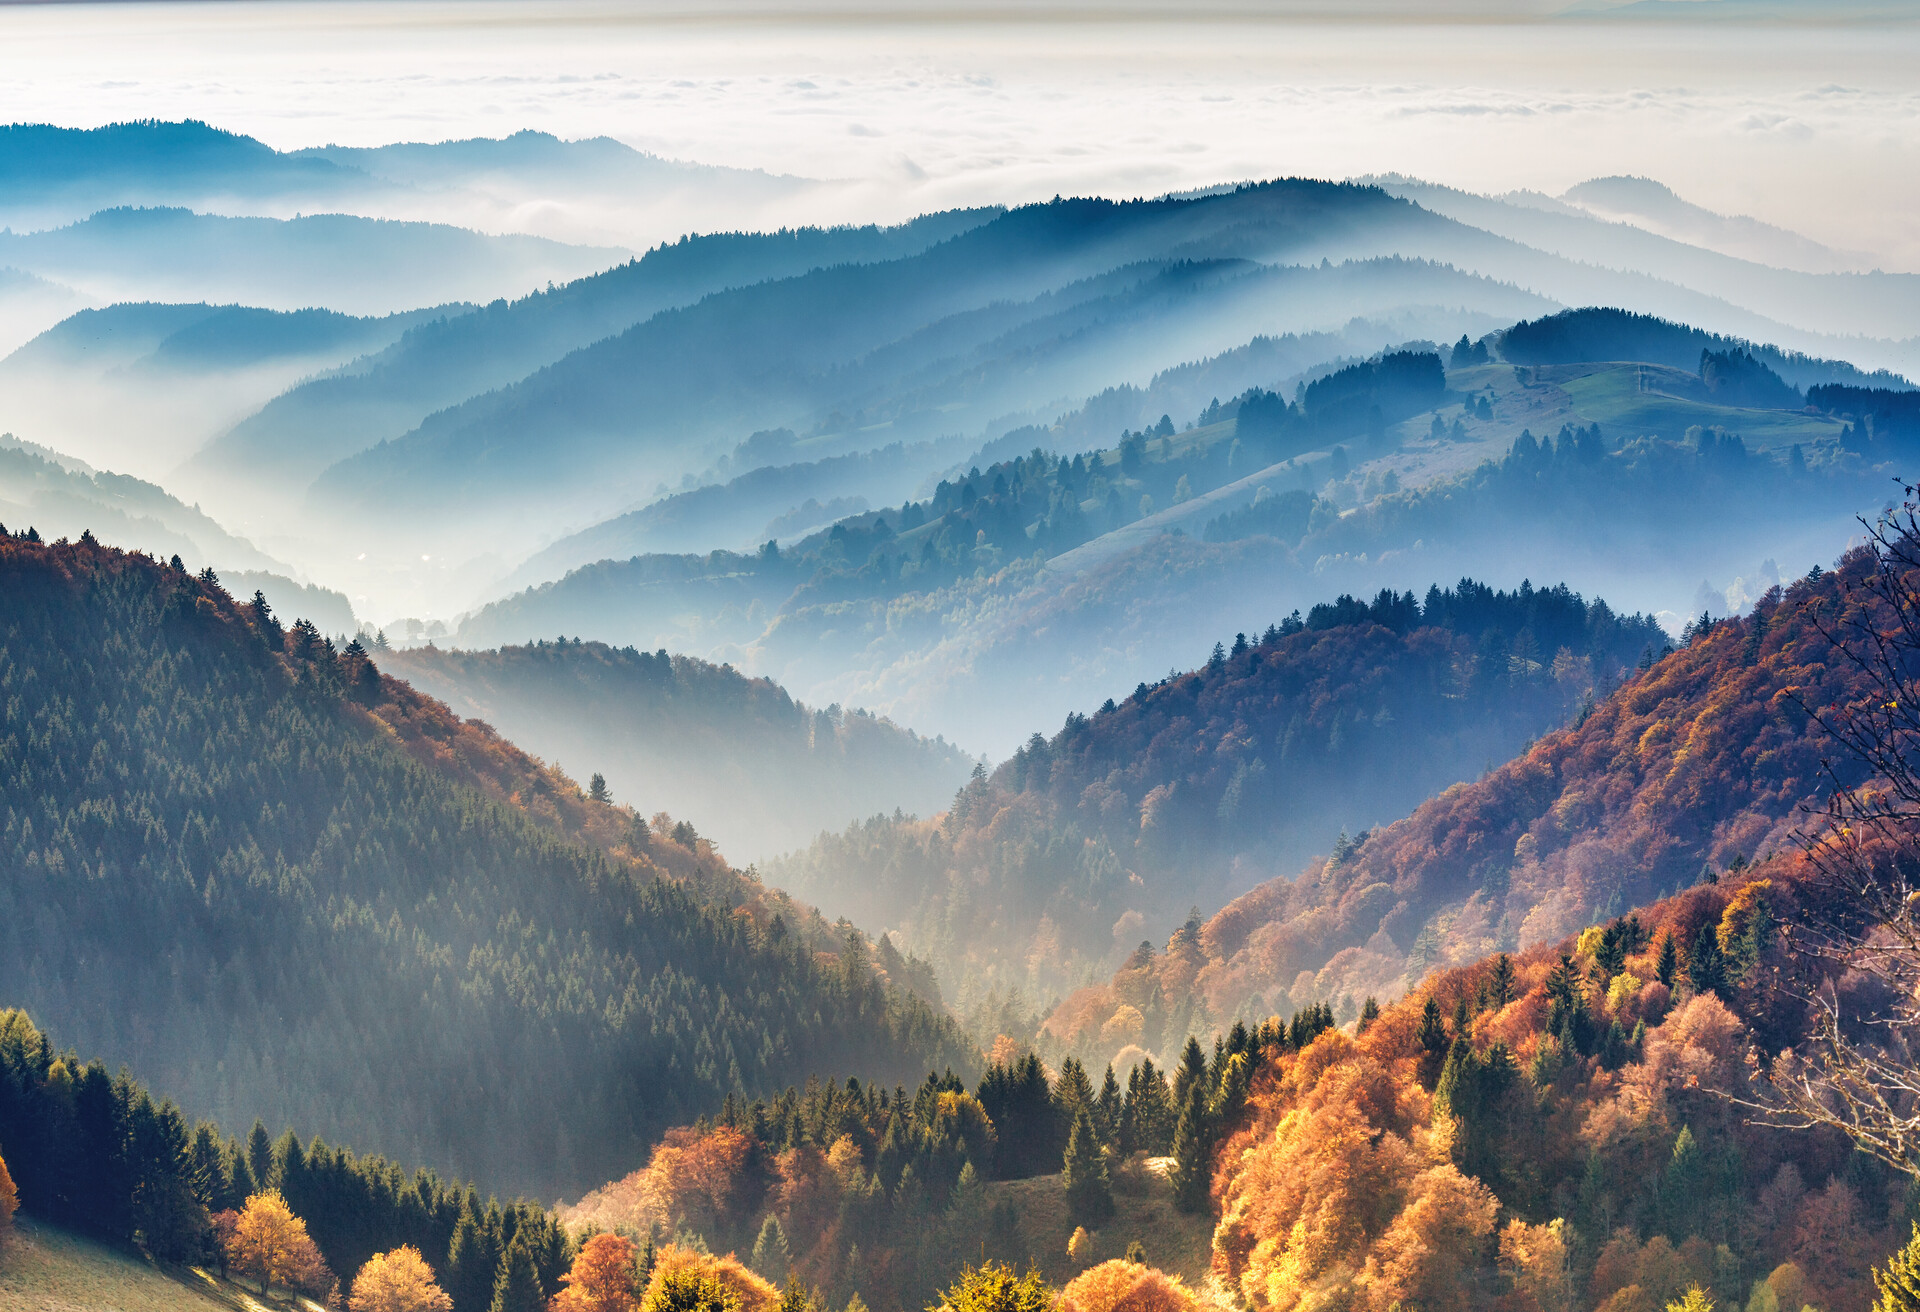 Scenic mountain landscape. View on the Black Forest, Germany, covered in fog. Colorful travel background.